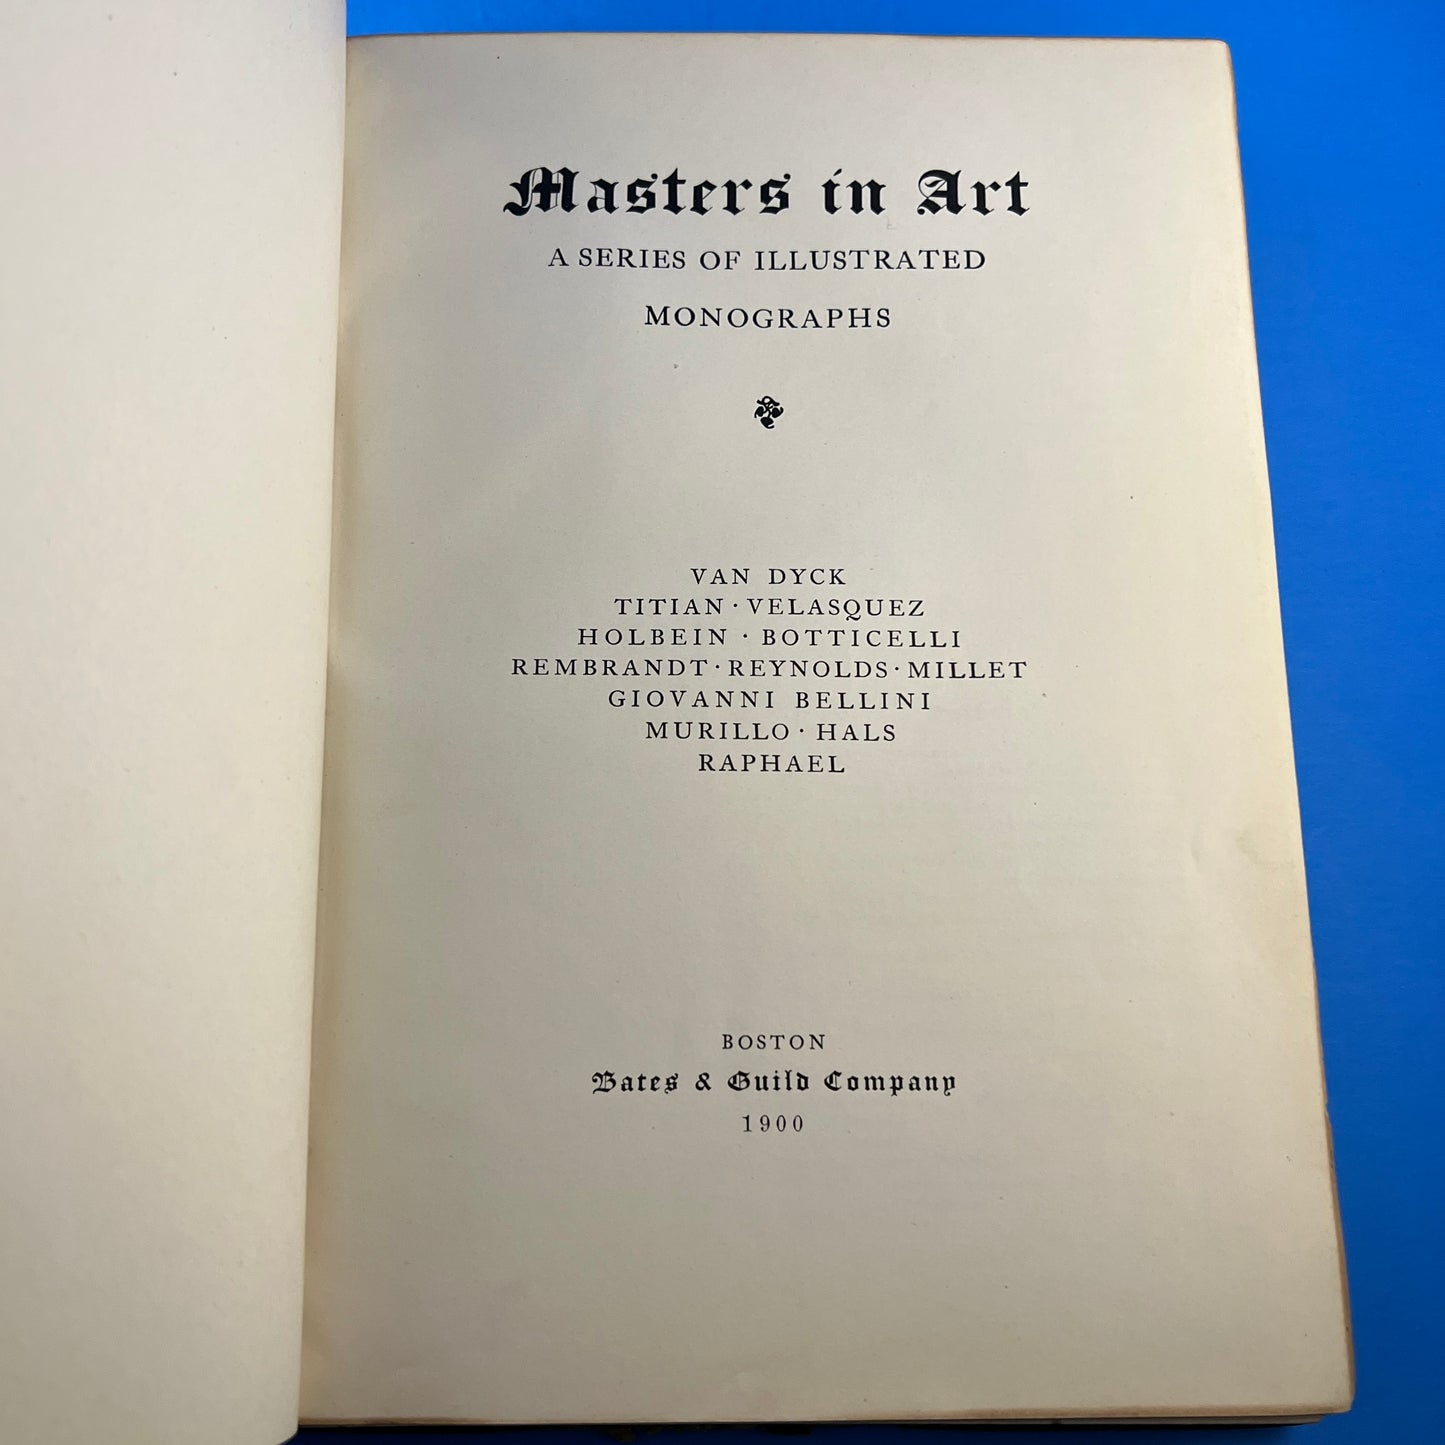 Masters in Art: A Series of Illustrated Monographs